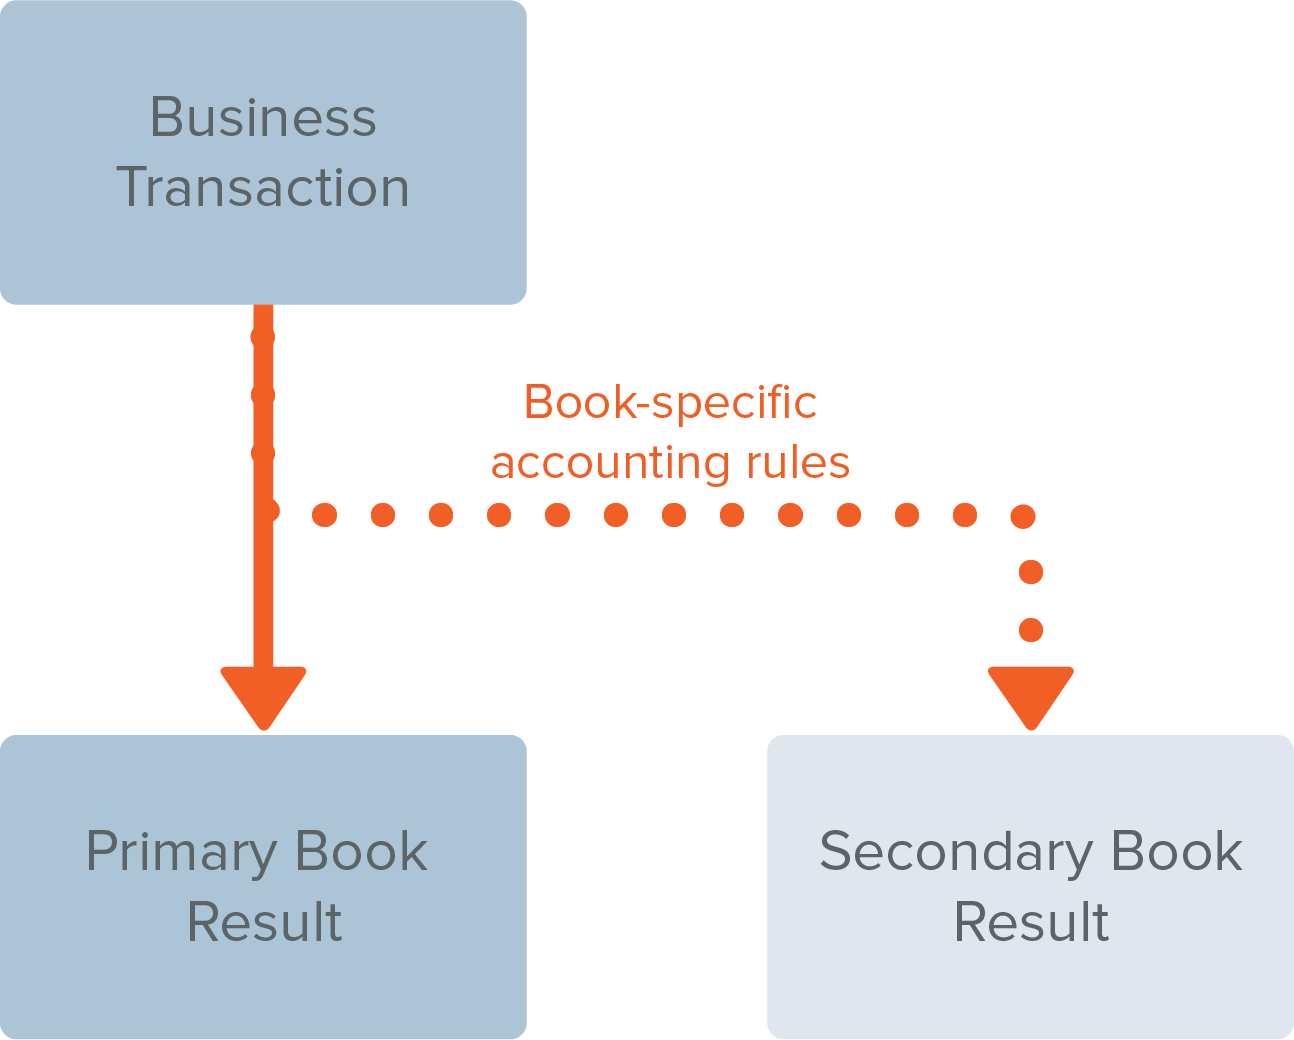 Book specific accounting rules diagram.